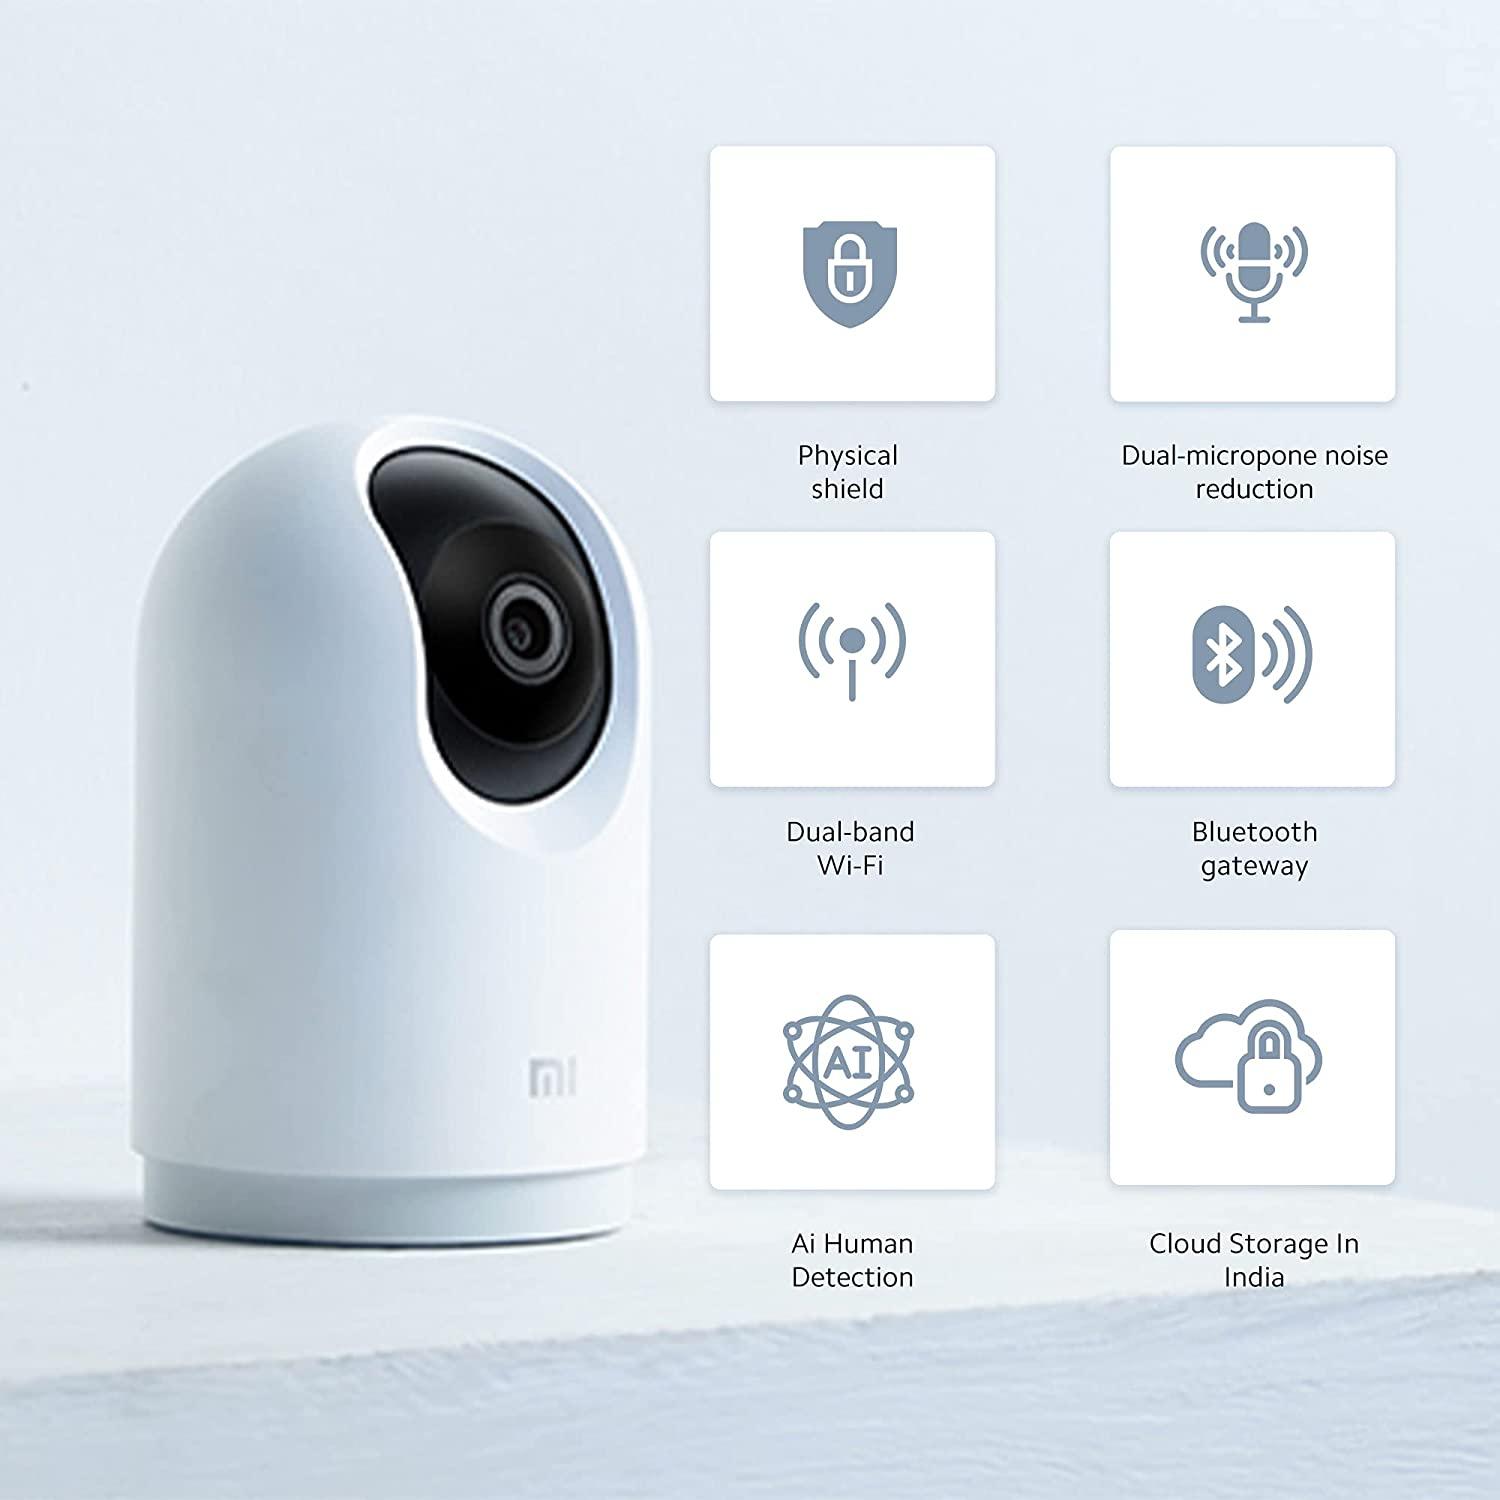 MI 360 HOME SECURITY CAMERA 2K PRO - UNBOXING 